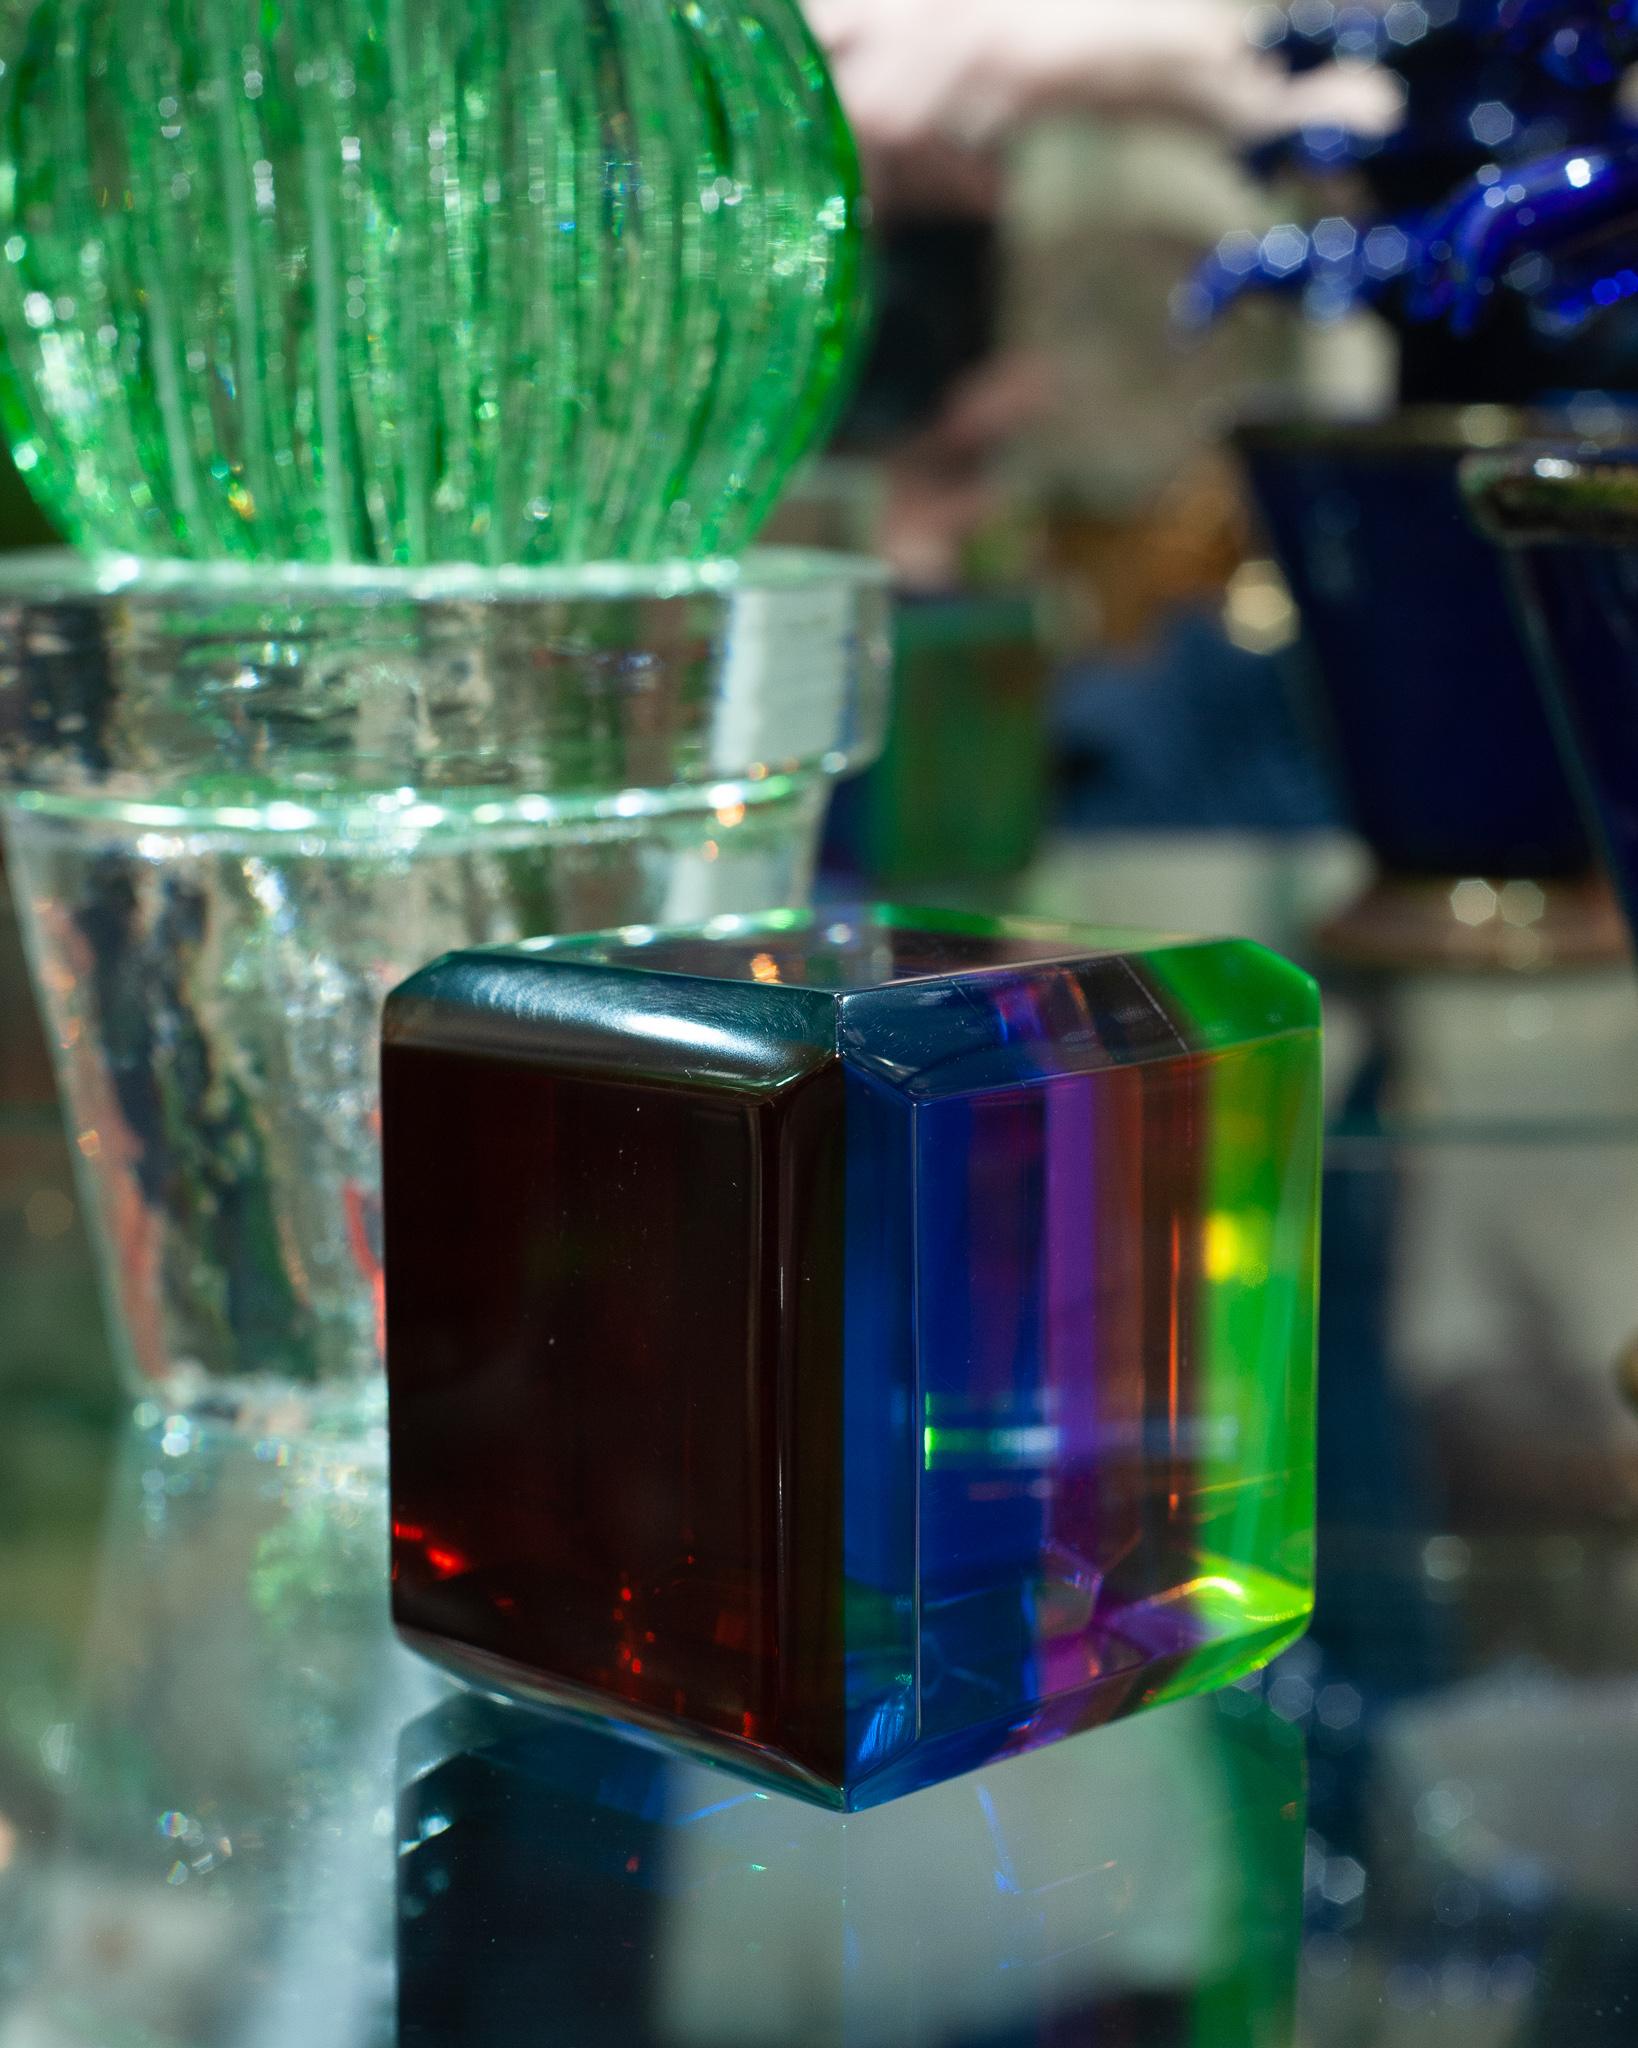 A stunning contemporary multicoloured acrylic block. A perfect riser for a small sculpture or a statement on its own on the table or desk, this beautiful block will reveal different tones and hues of colour from each angle it’s viewed from.